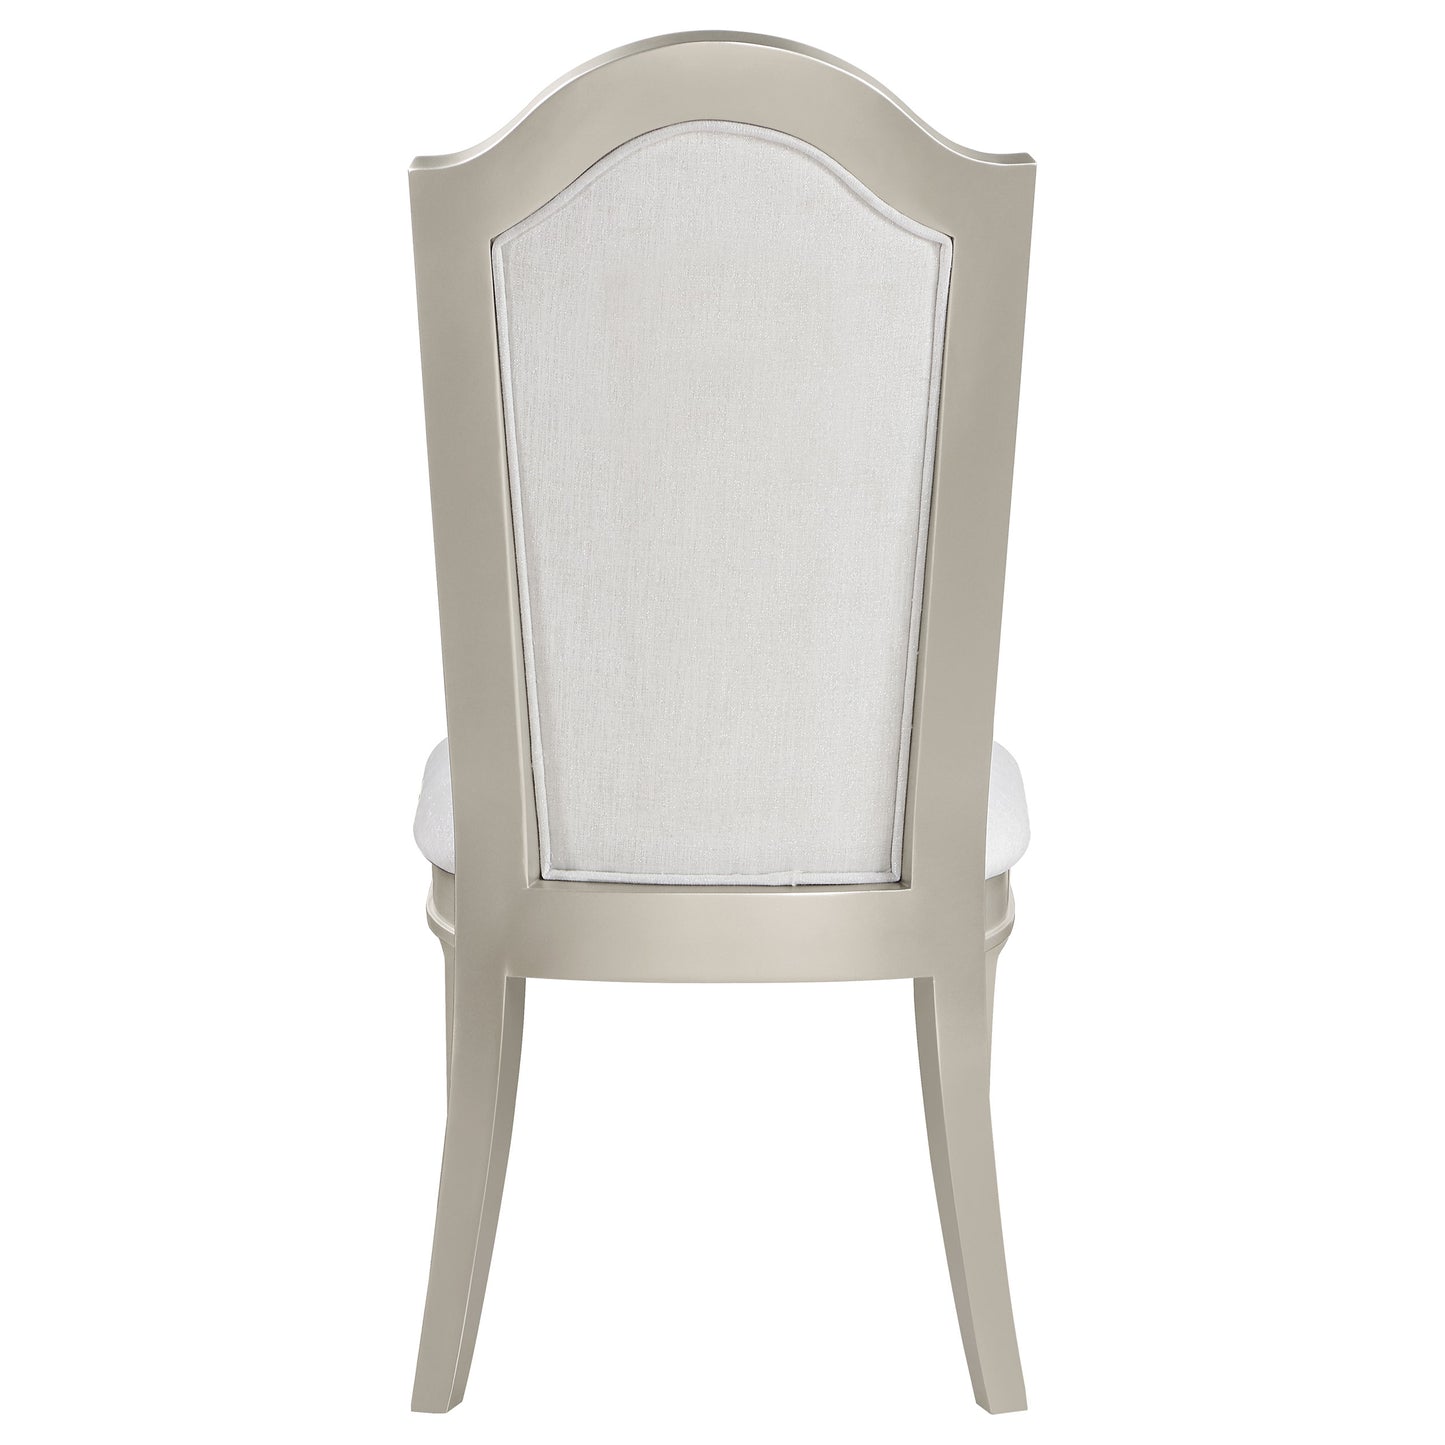 Evangeline Upholstered Dining Side Chair with Faux Diamond Trim Ivory and Silver Oak (Set of 2)